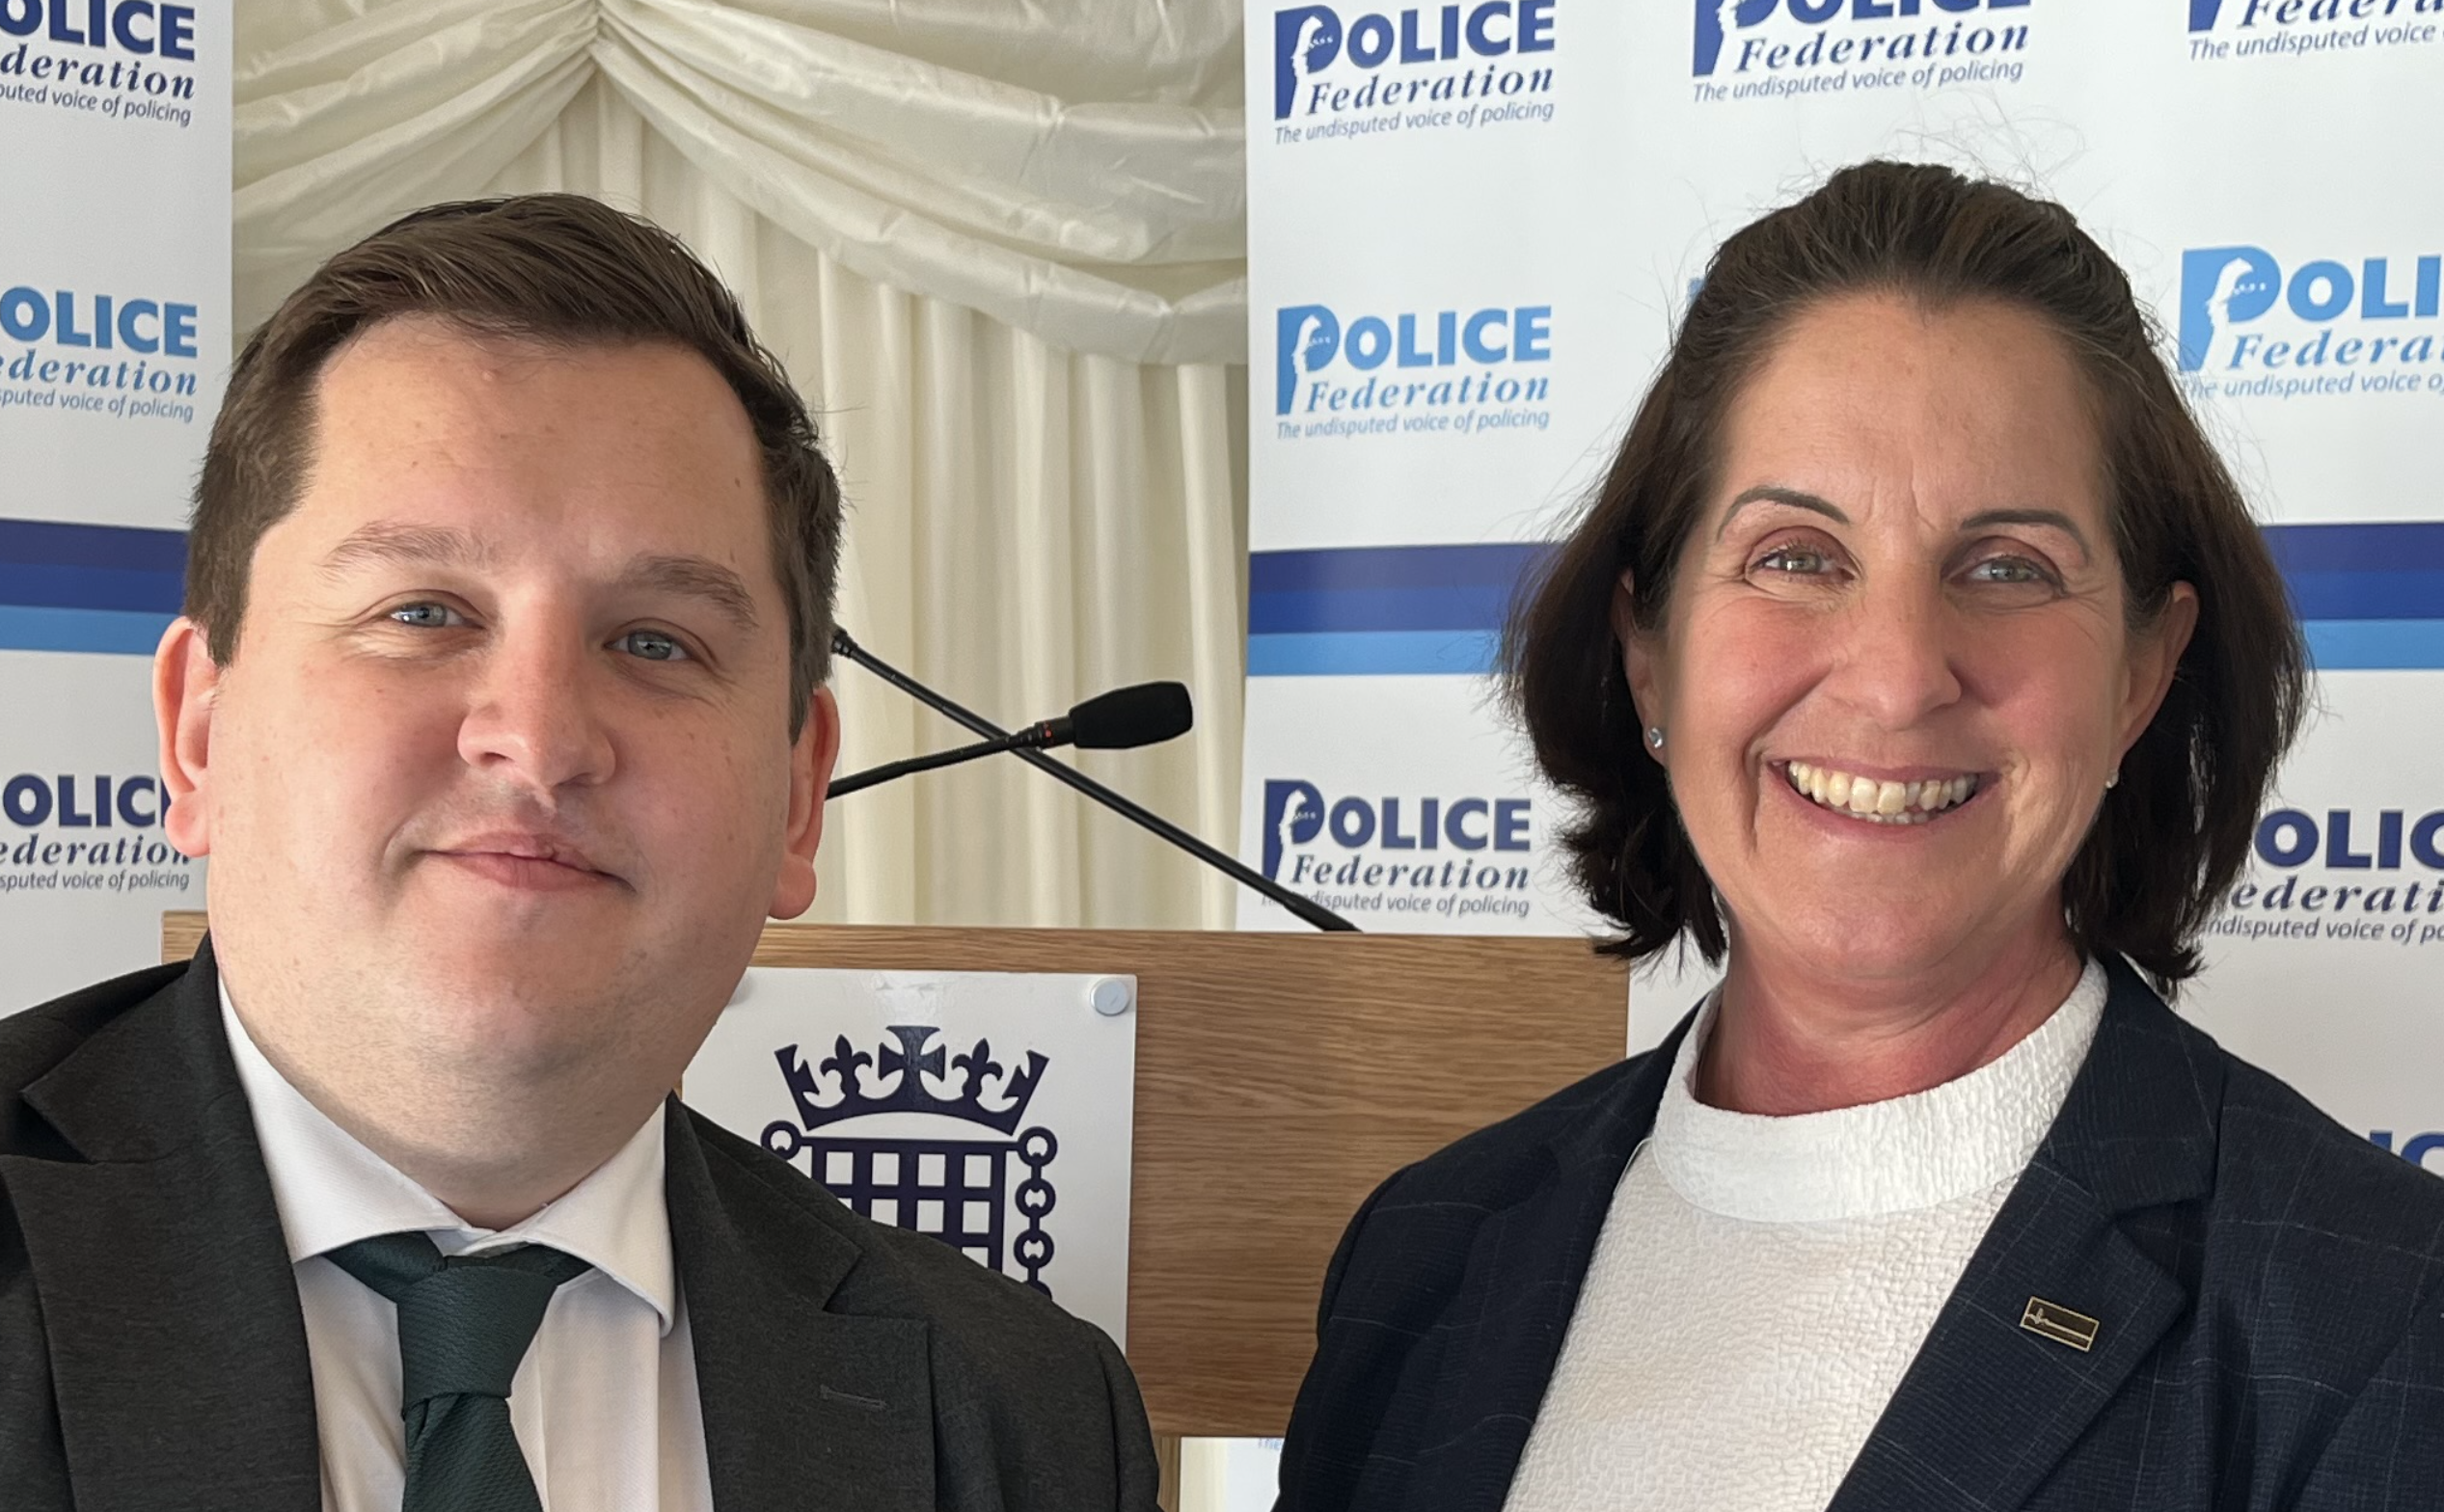 Louie French MP, who sponsored the event, with Tiff Lynch, deputy chair of the Police Federation of England and Wales.